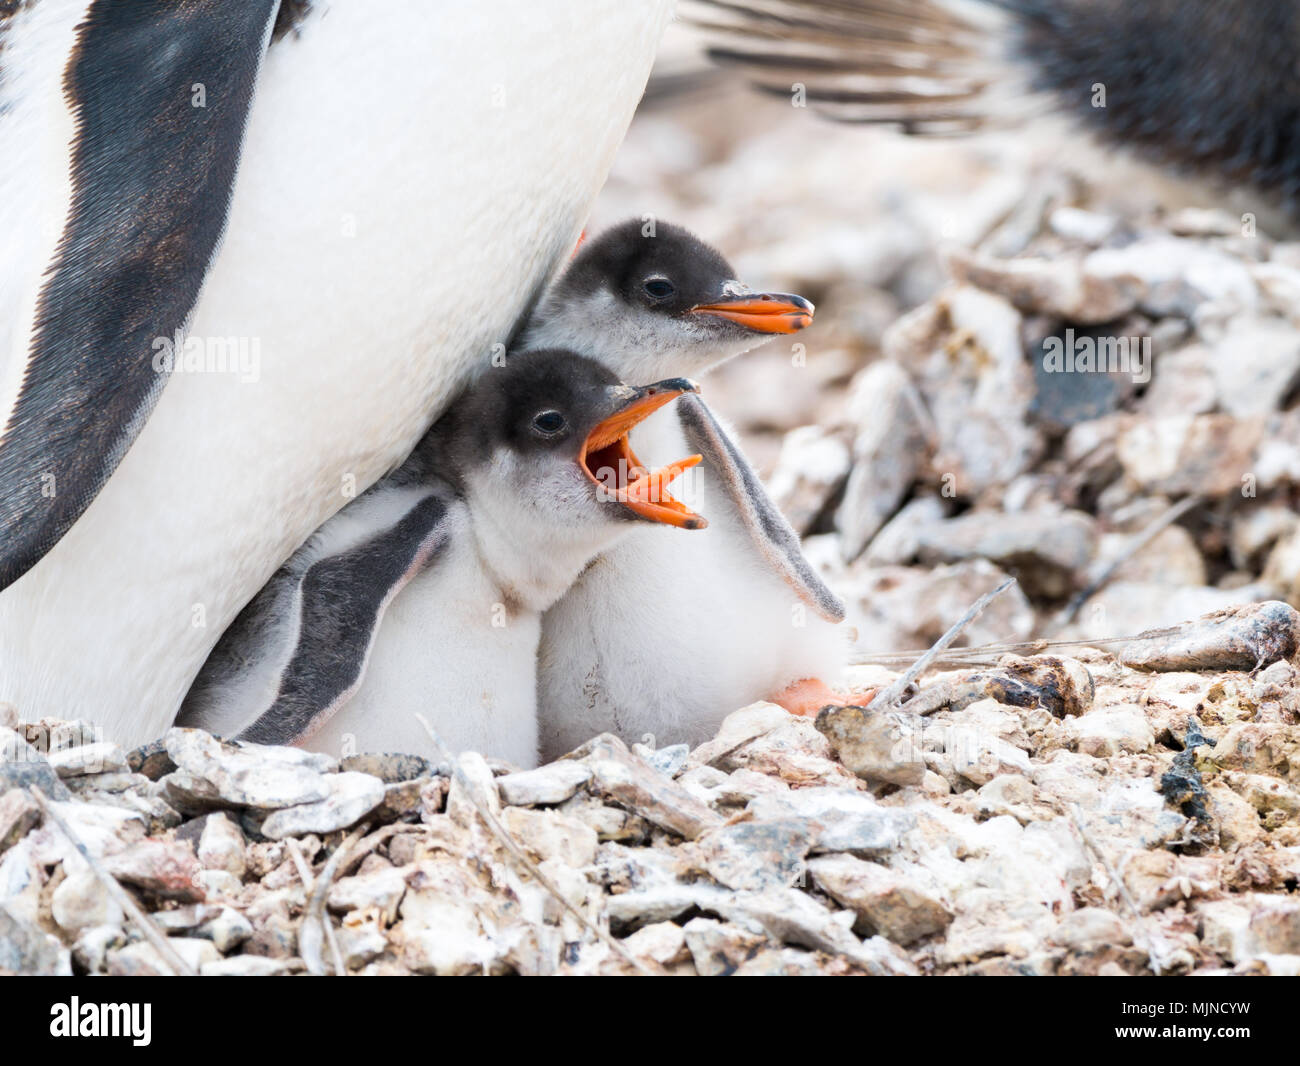 Gentoo penguin, Pygoscelis papua, chick begging for food by screaming with open beak, Cuverville Island, Antarctic Peninsula, Antarctica Stock Photo